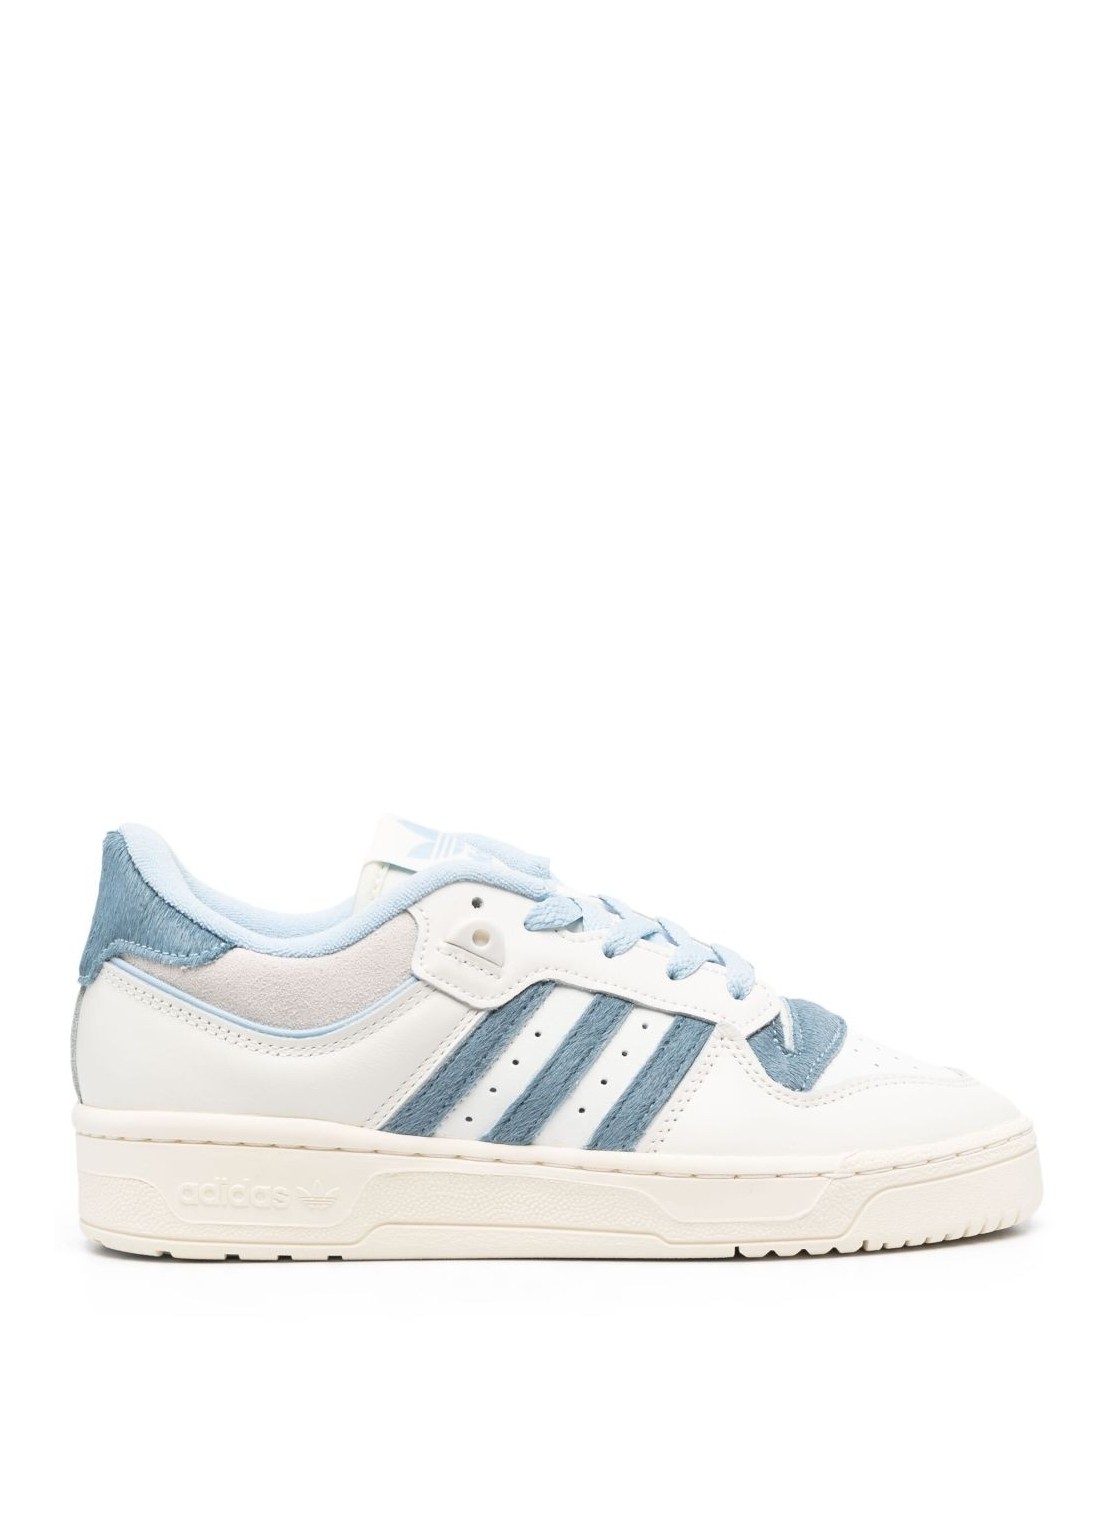 Sneaker adidas originals sneaker man rivalry 86 low ie7137 owhite clesky orbgry talla 45 1/3
 